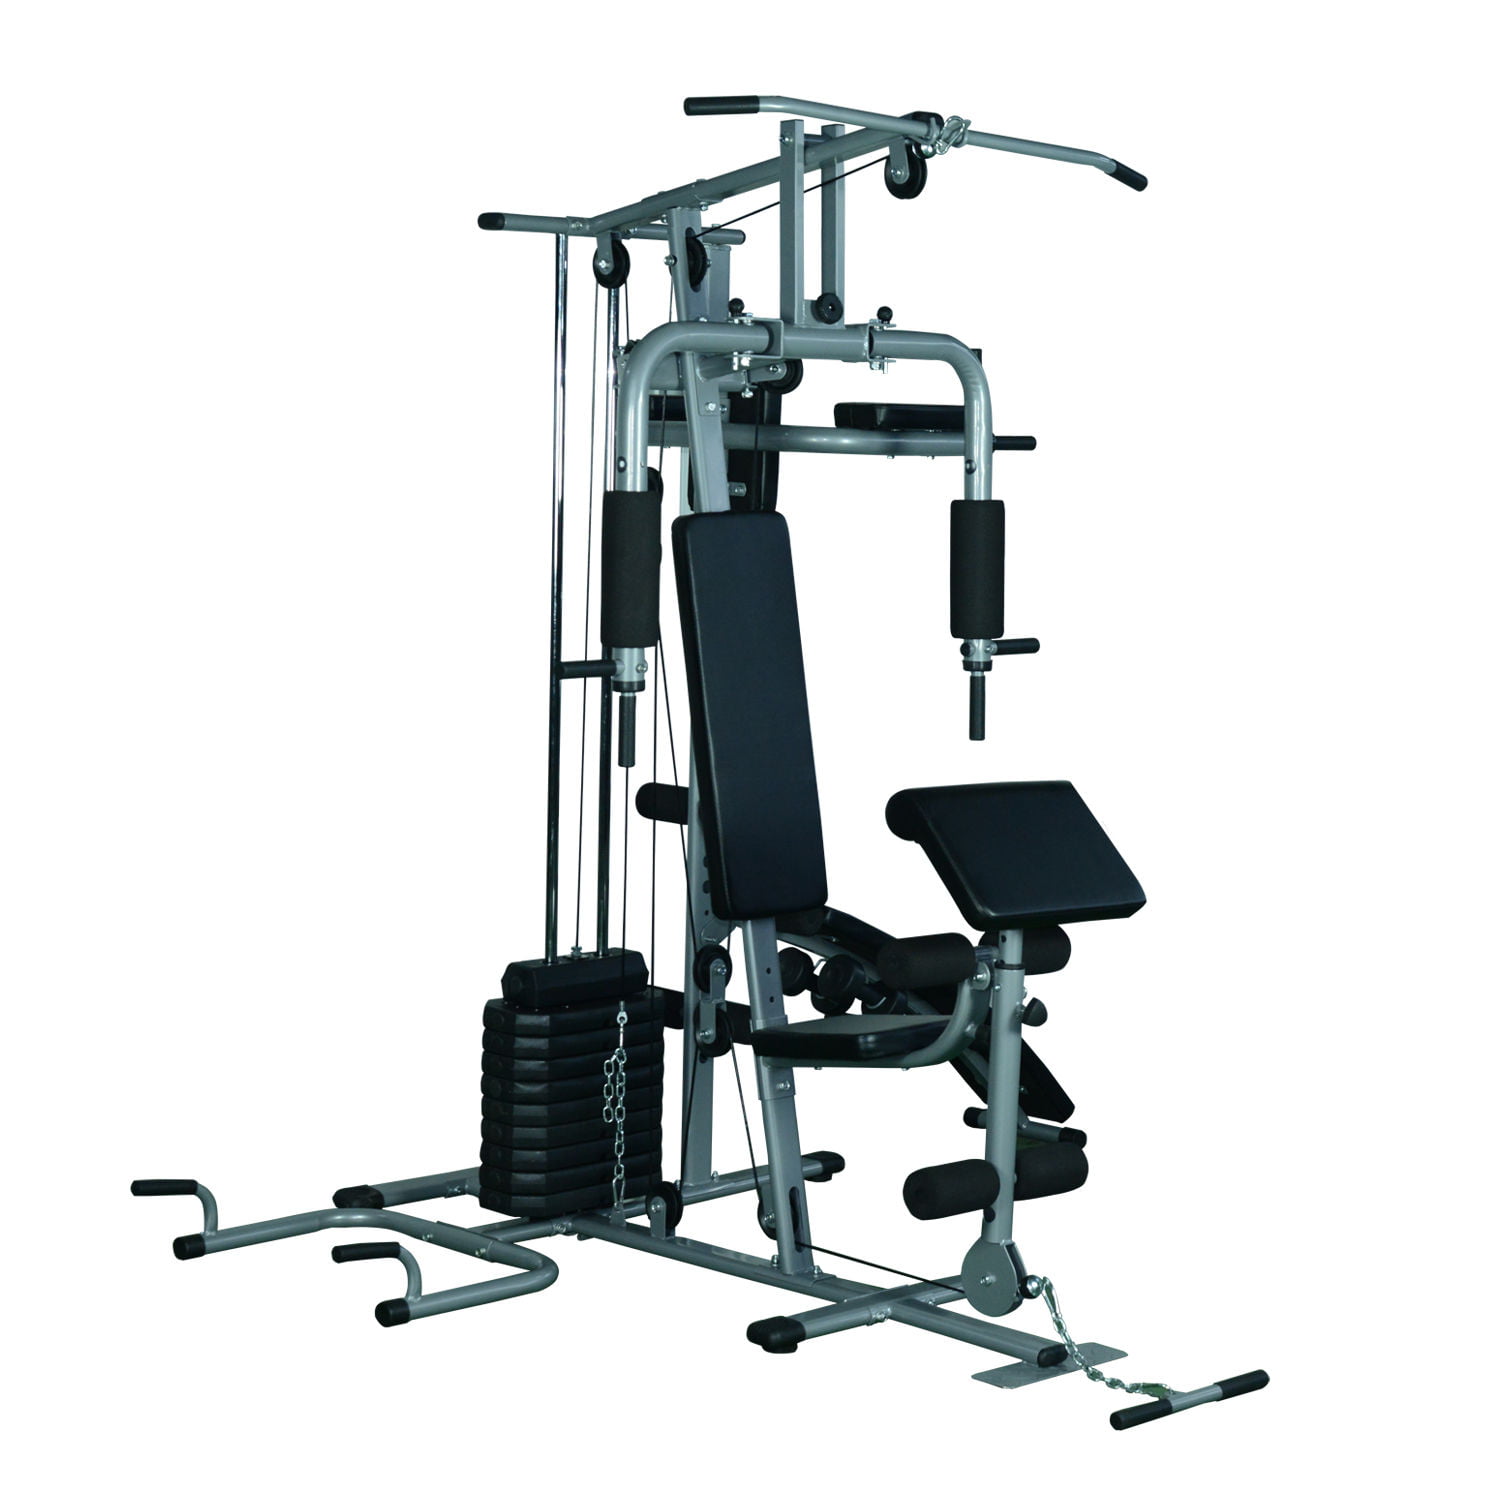 Soozier 100 Lb Stack Multi Exercise Home Fitness Station Gym Machine